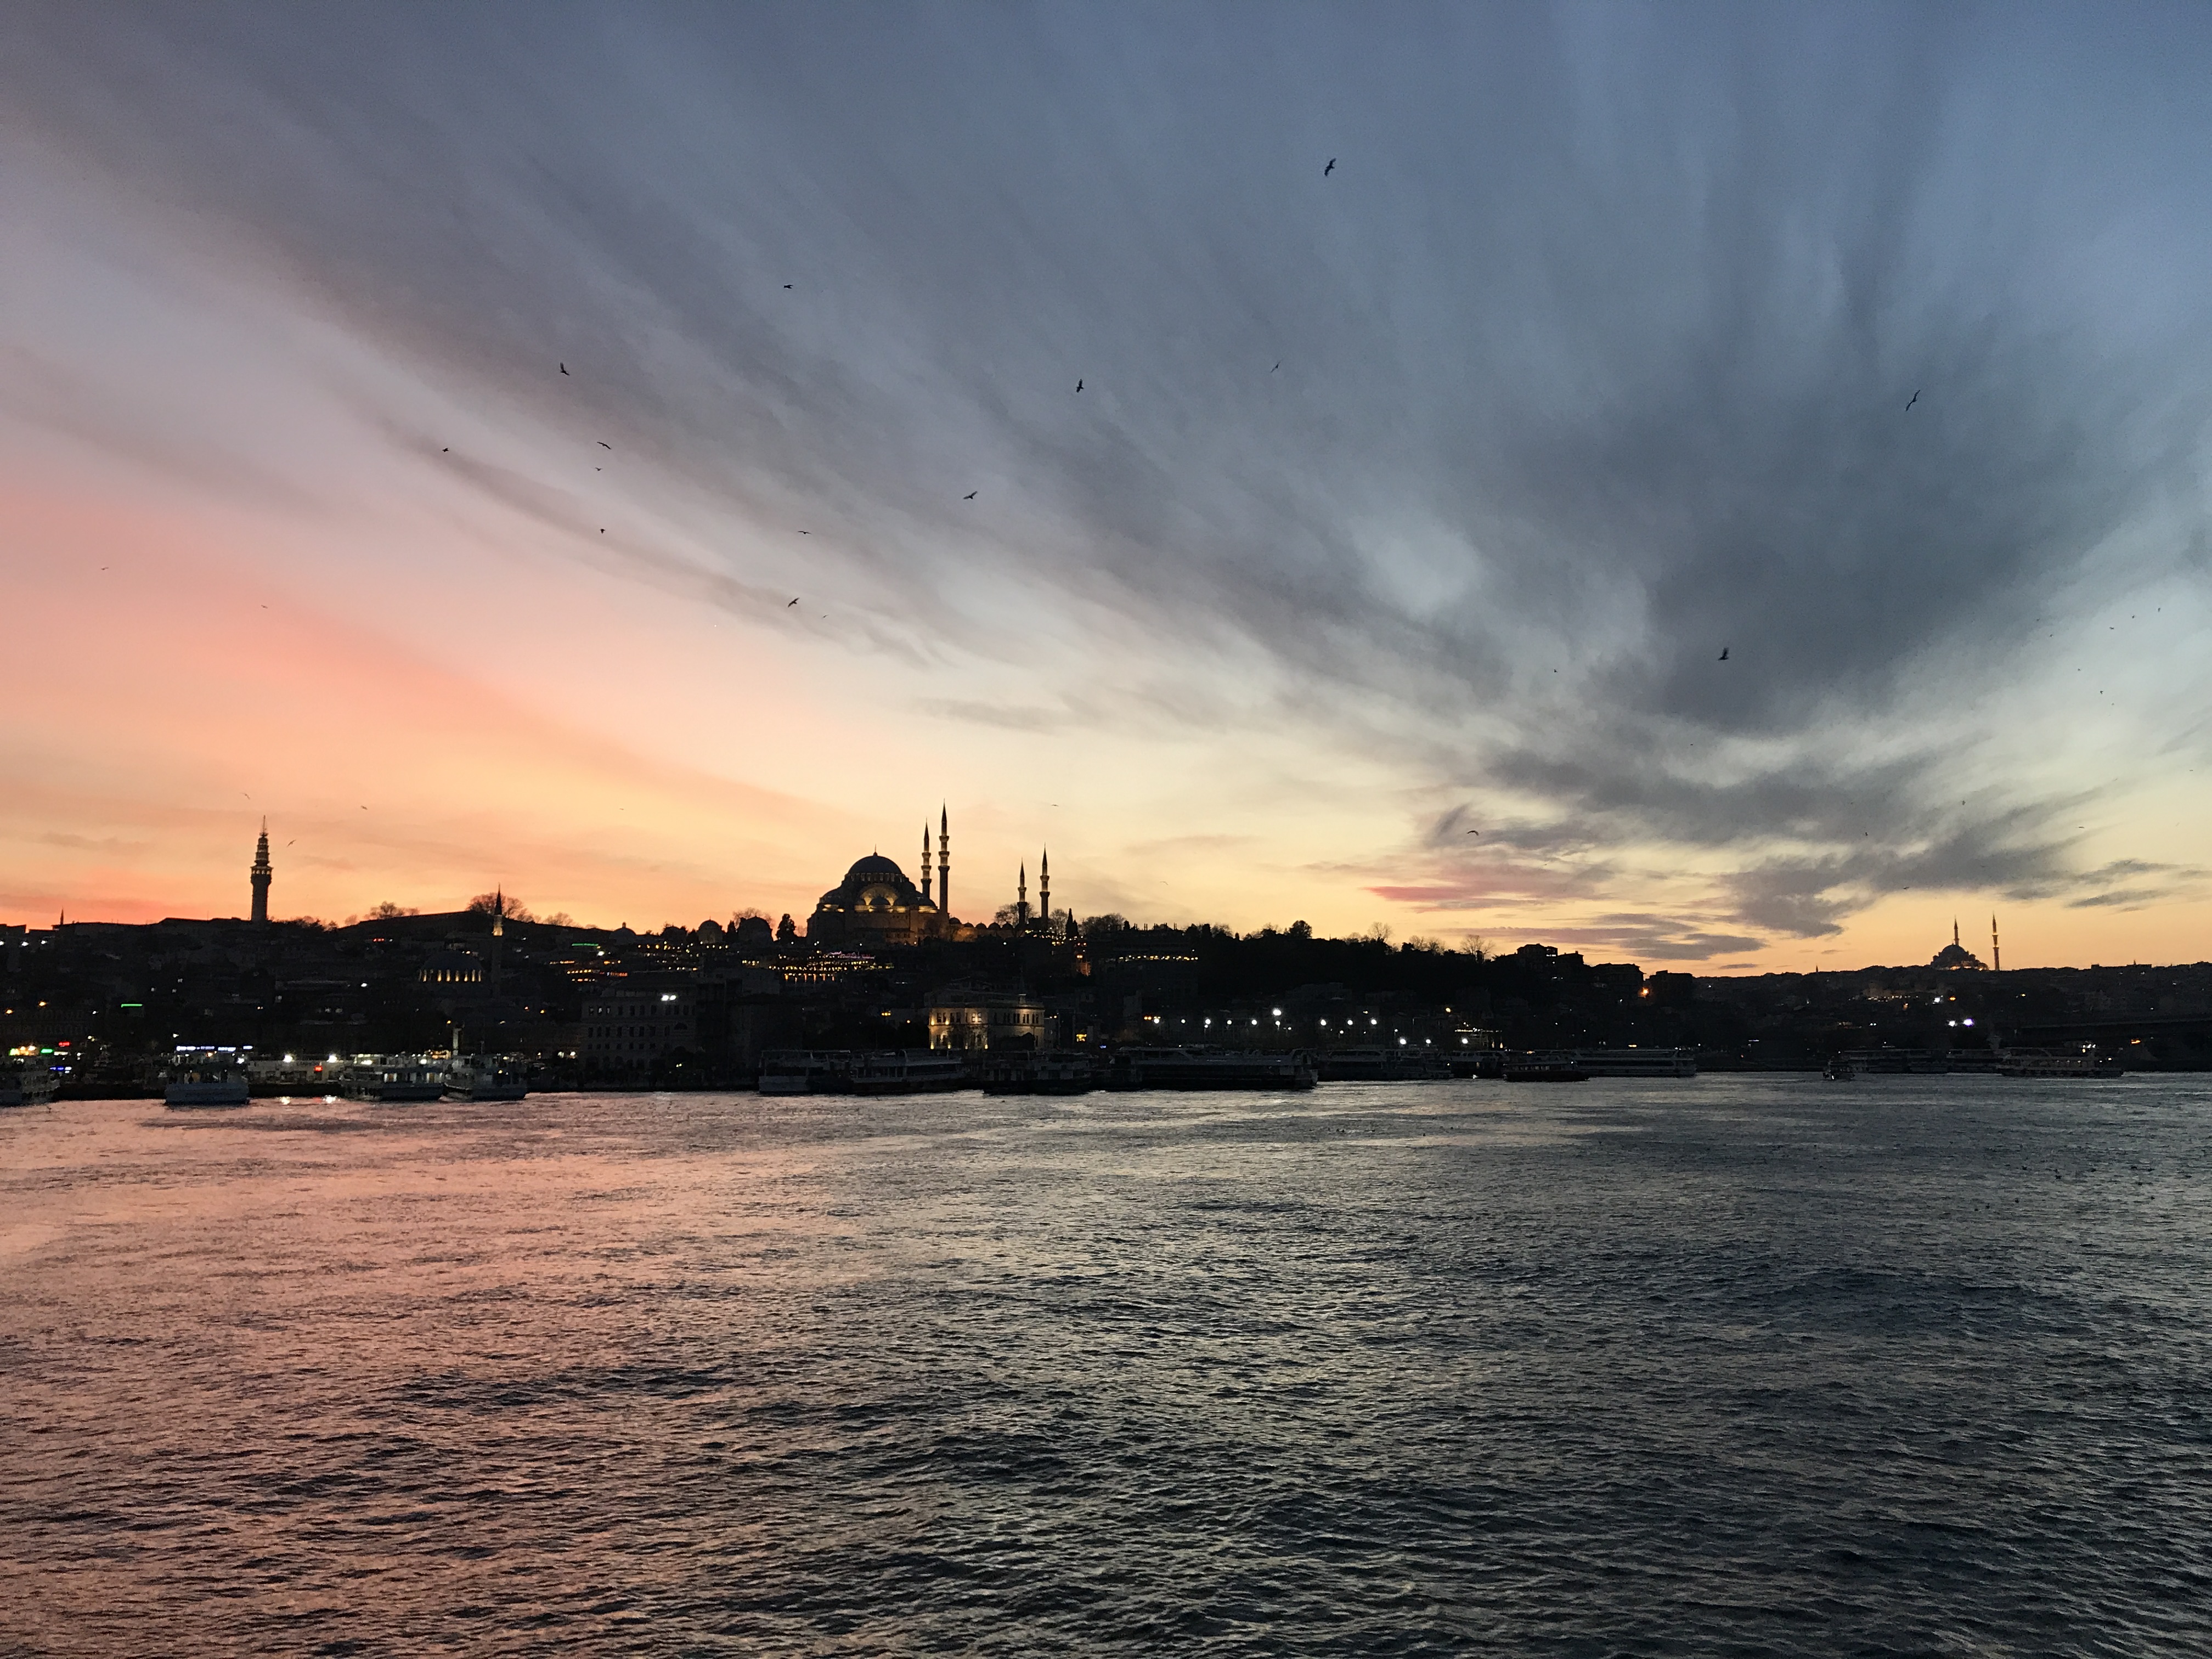 istanbul sunset taken by me